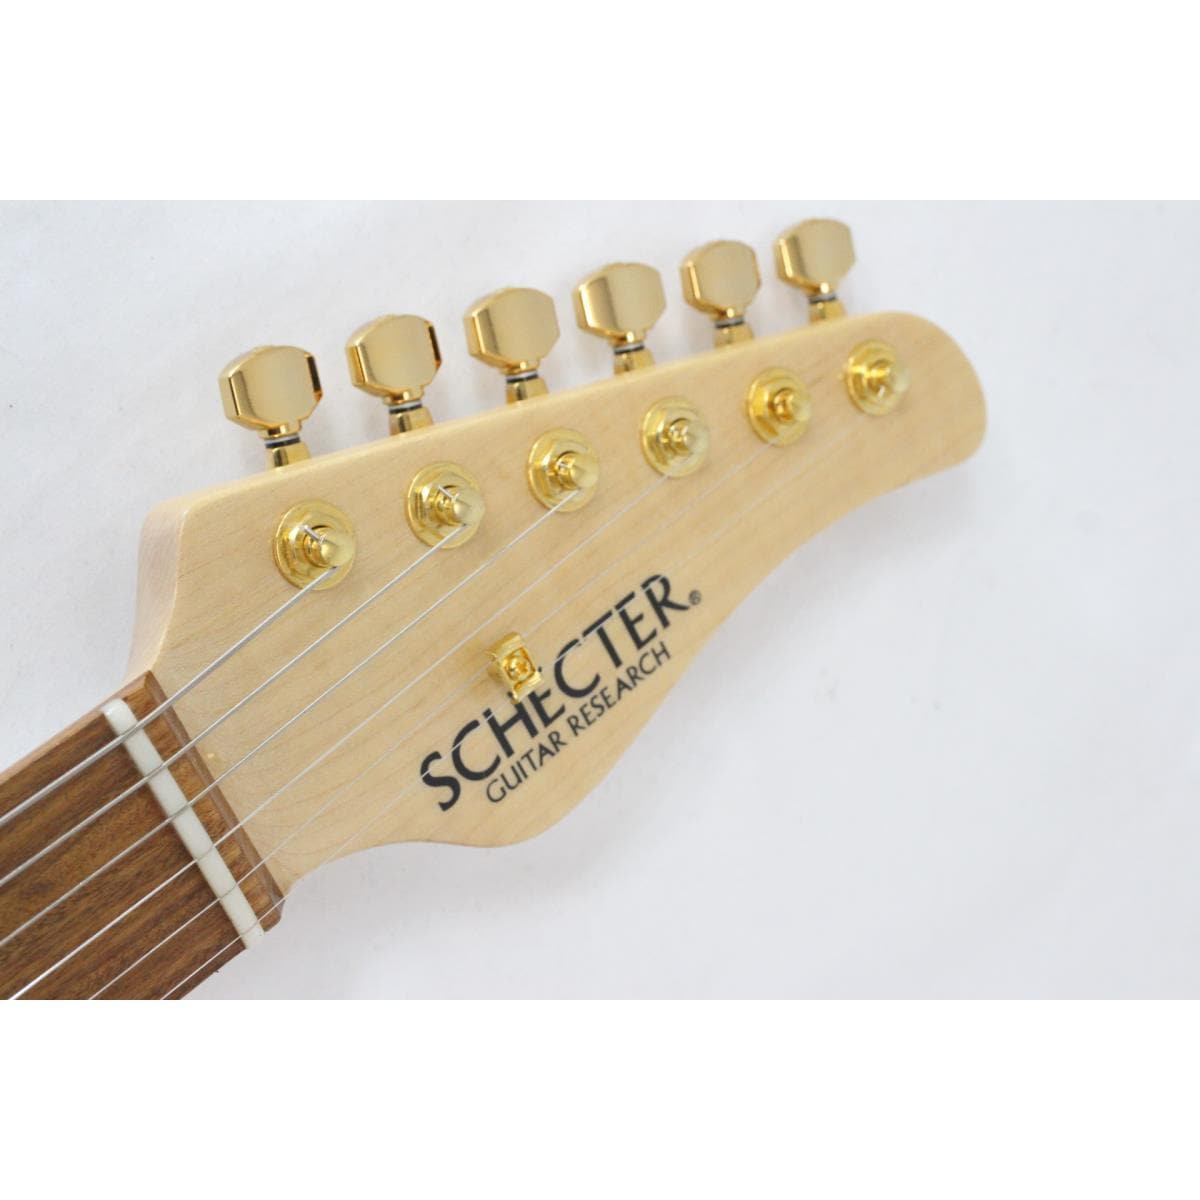 SCHECTER NV-4-24-MH-W